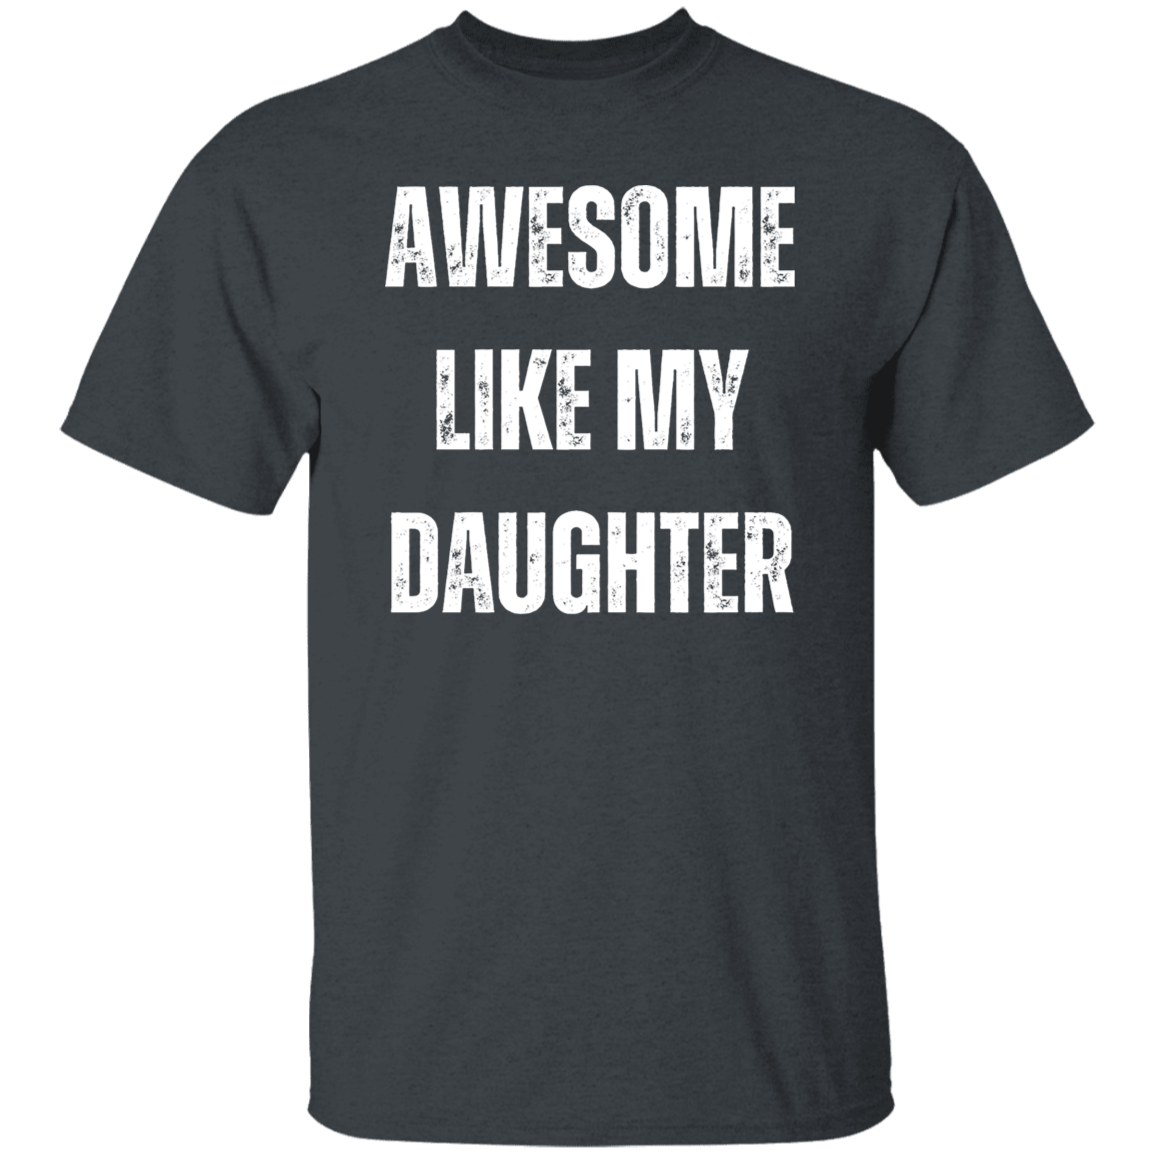 Awesome Like My Daughter G500 5.3 oz. T-Shirt